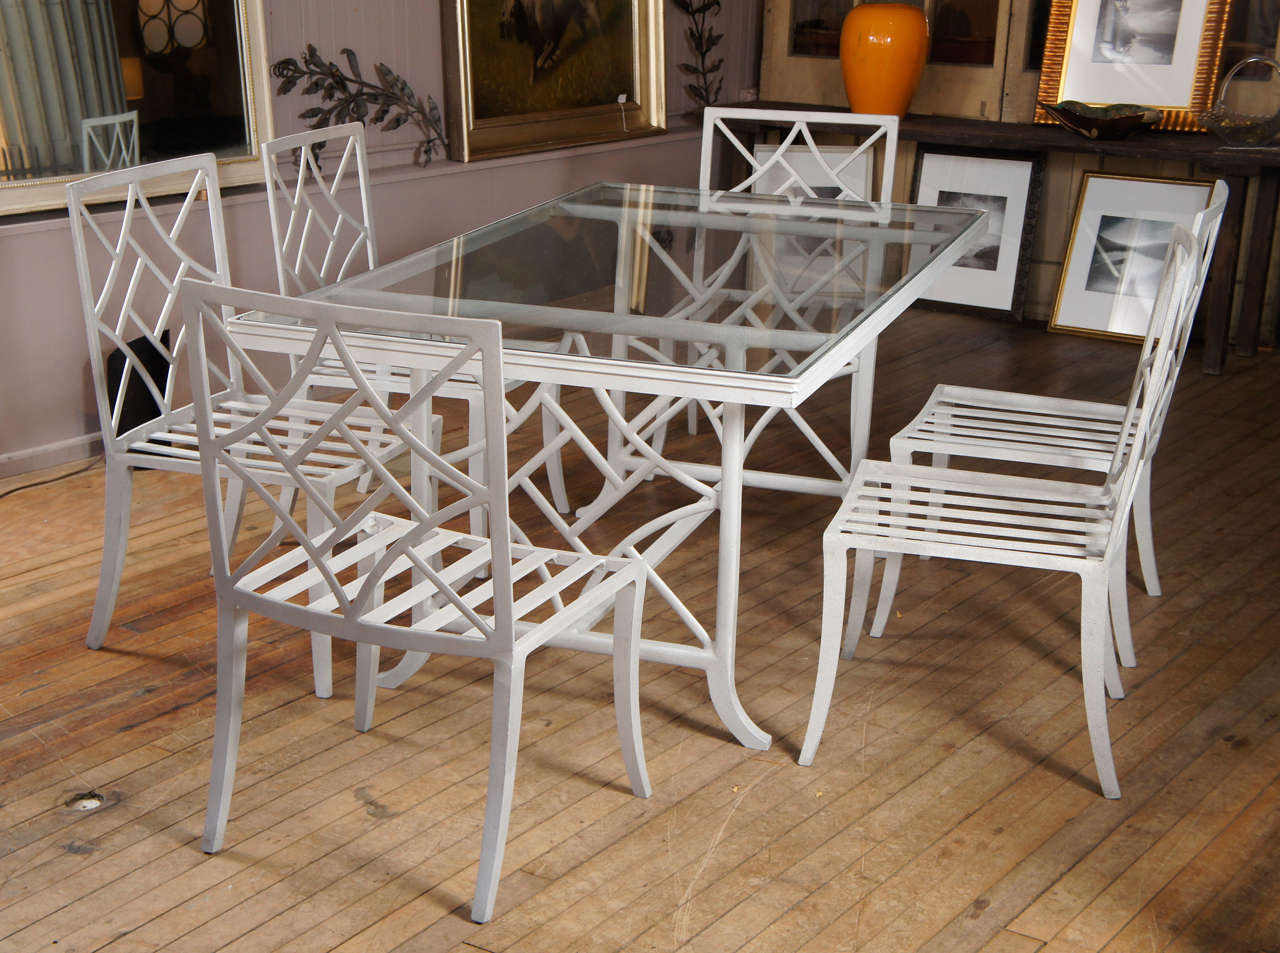 hollywood chippendale style  glass top dining table with 6 side chairs and 2 armchairs - c. 1950's - sand cast in Zinc (white bronze) - has been sandblasted to raw metal - measurements: table 36.5